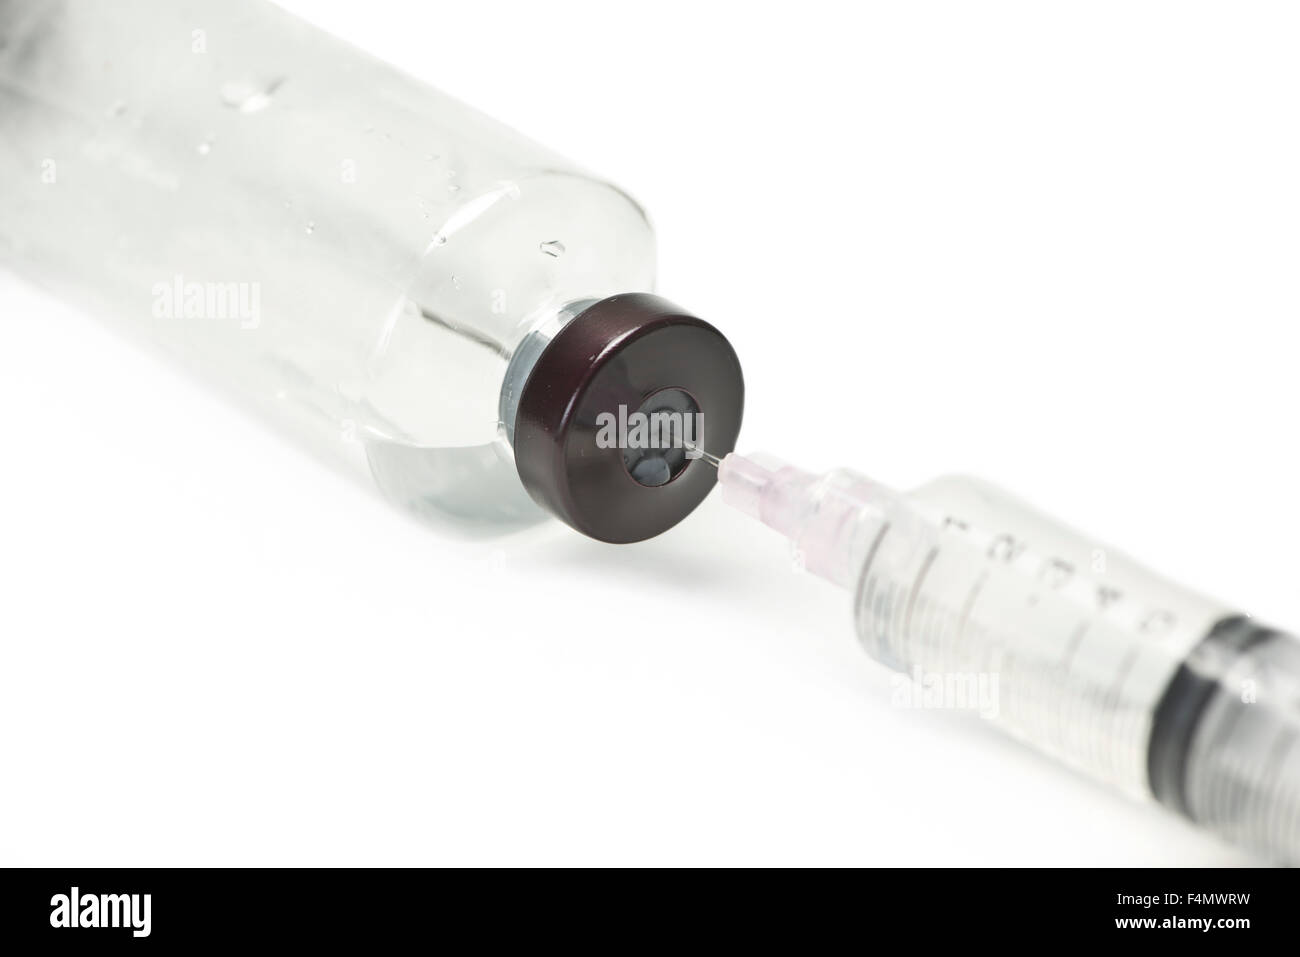 Syringe draws liquid from large clear vial. Stock Photo